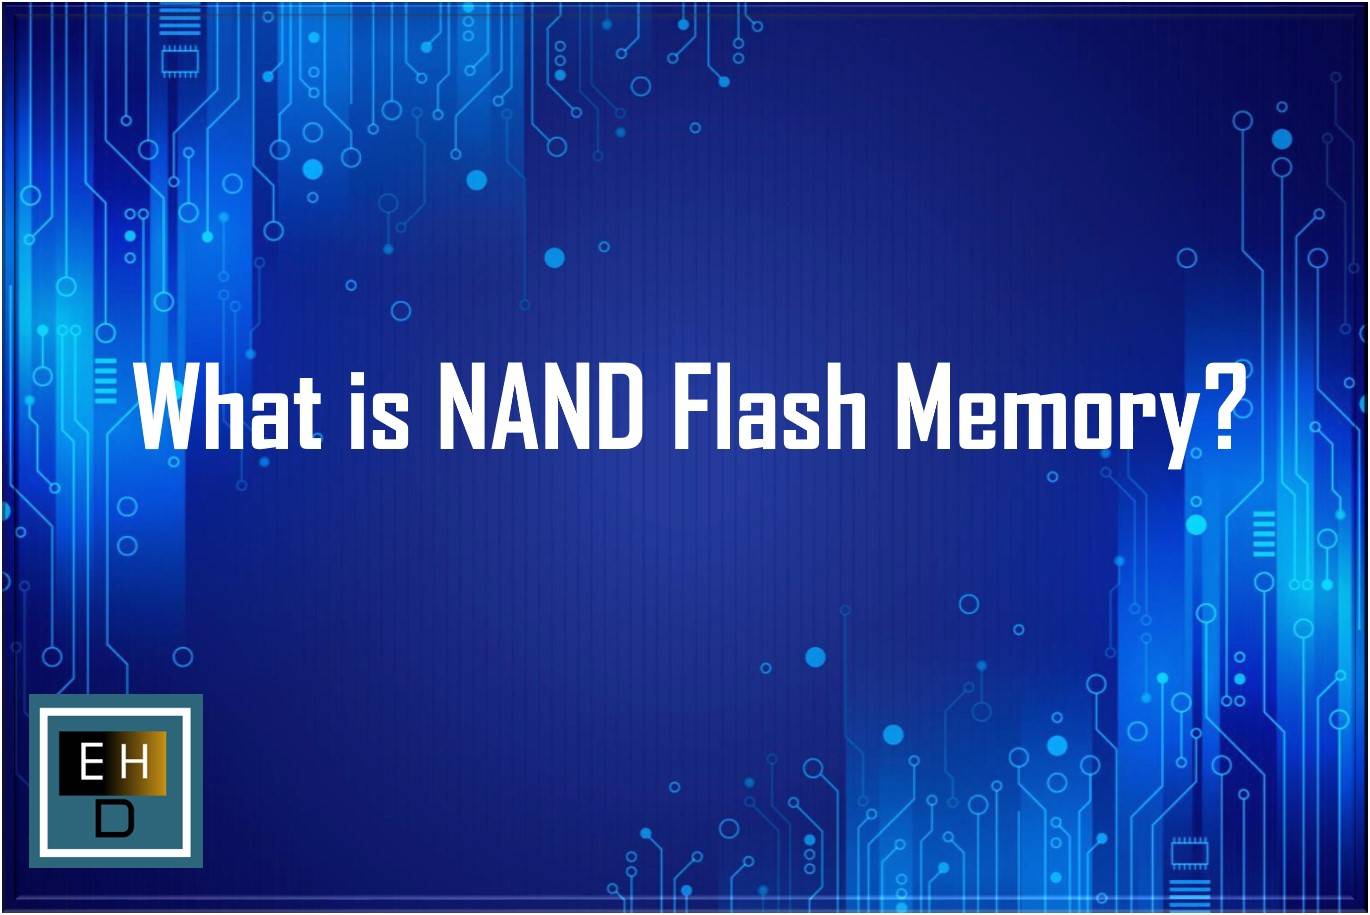 What is NAND Flash Memory